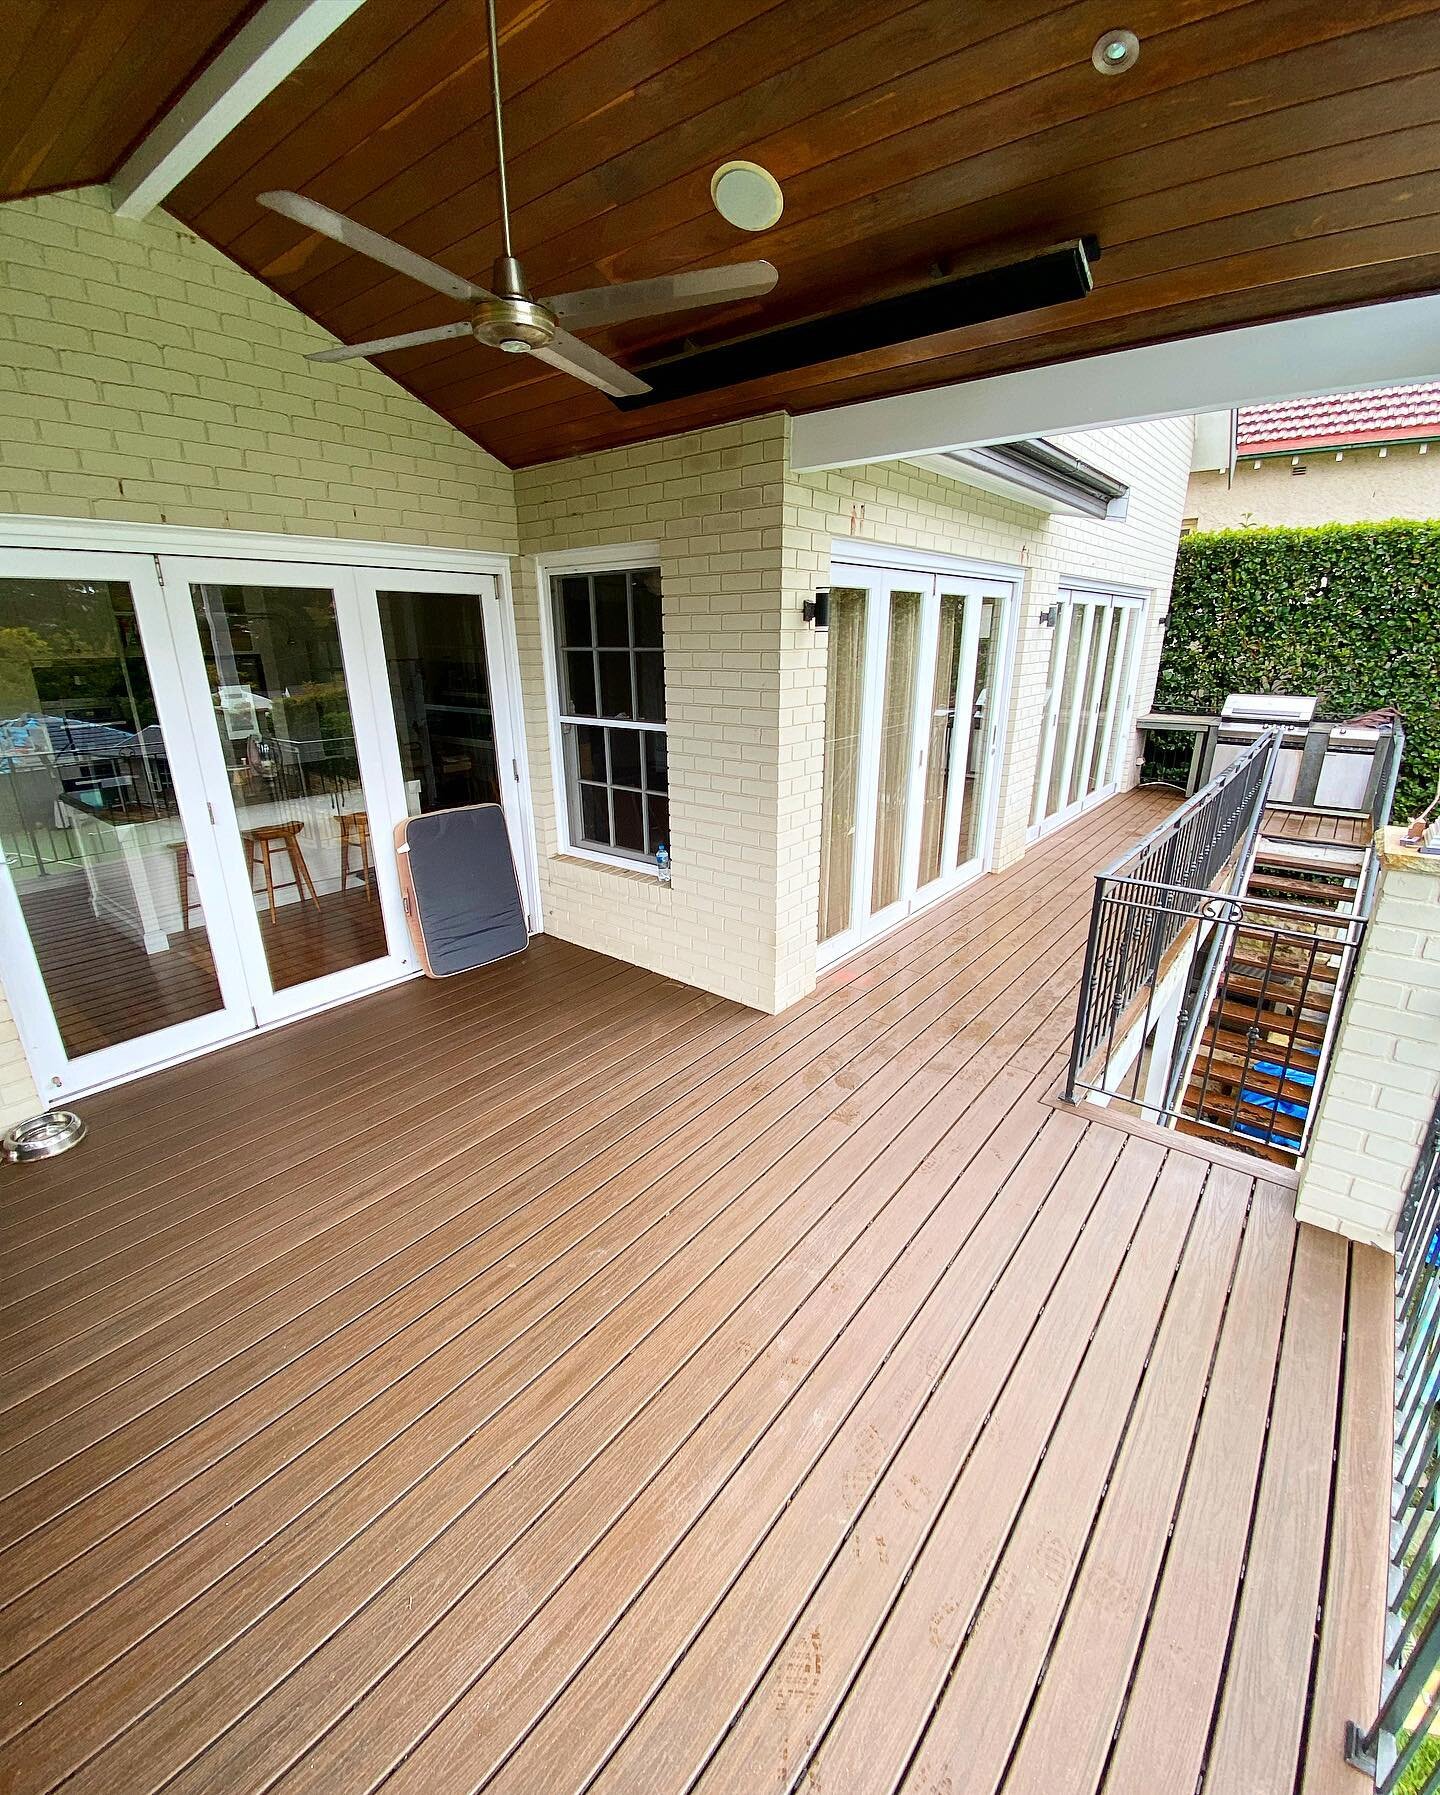 Another project completed by @luxcarpentryconstruction in Pymble, Sydney📍⁣
⁣
Our client wanted their existing deck replaced with @trexcompany Trex Decking prior to listing their home on the market! ⁣
⁣
👈🏼 Swipe left to see the before, during, and 